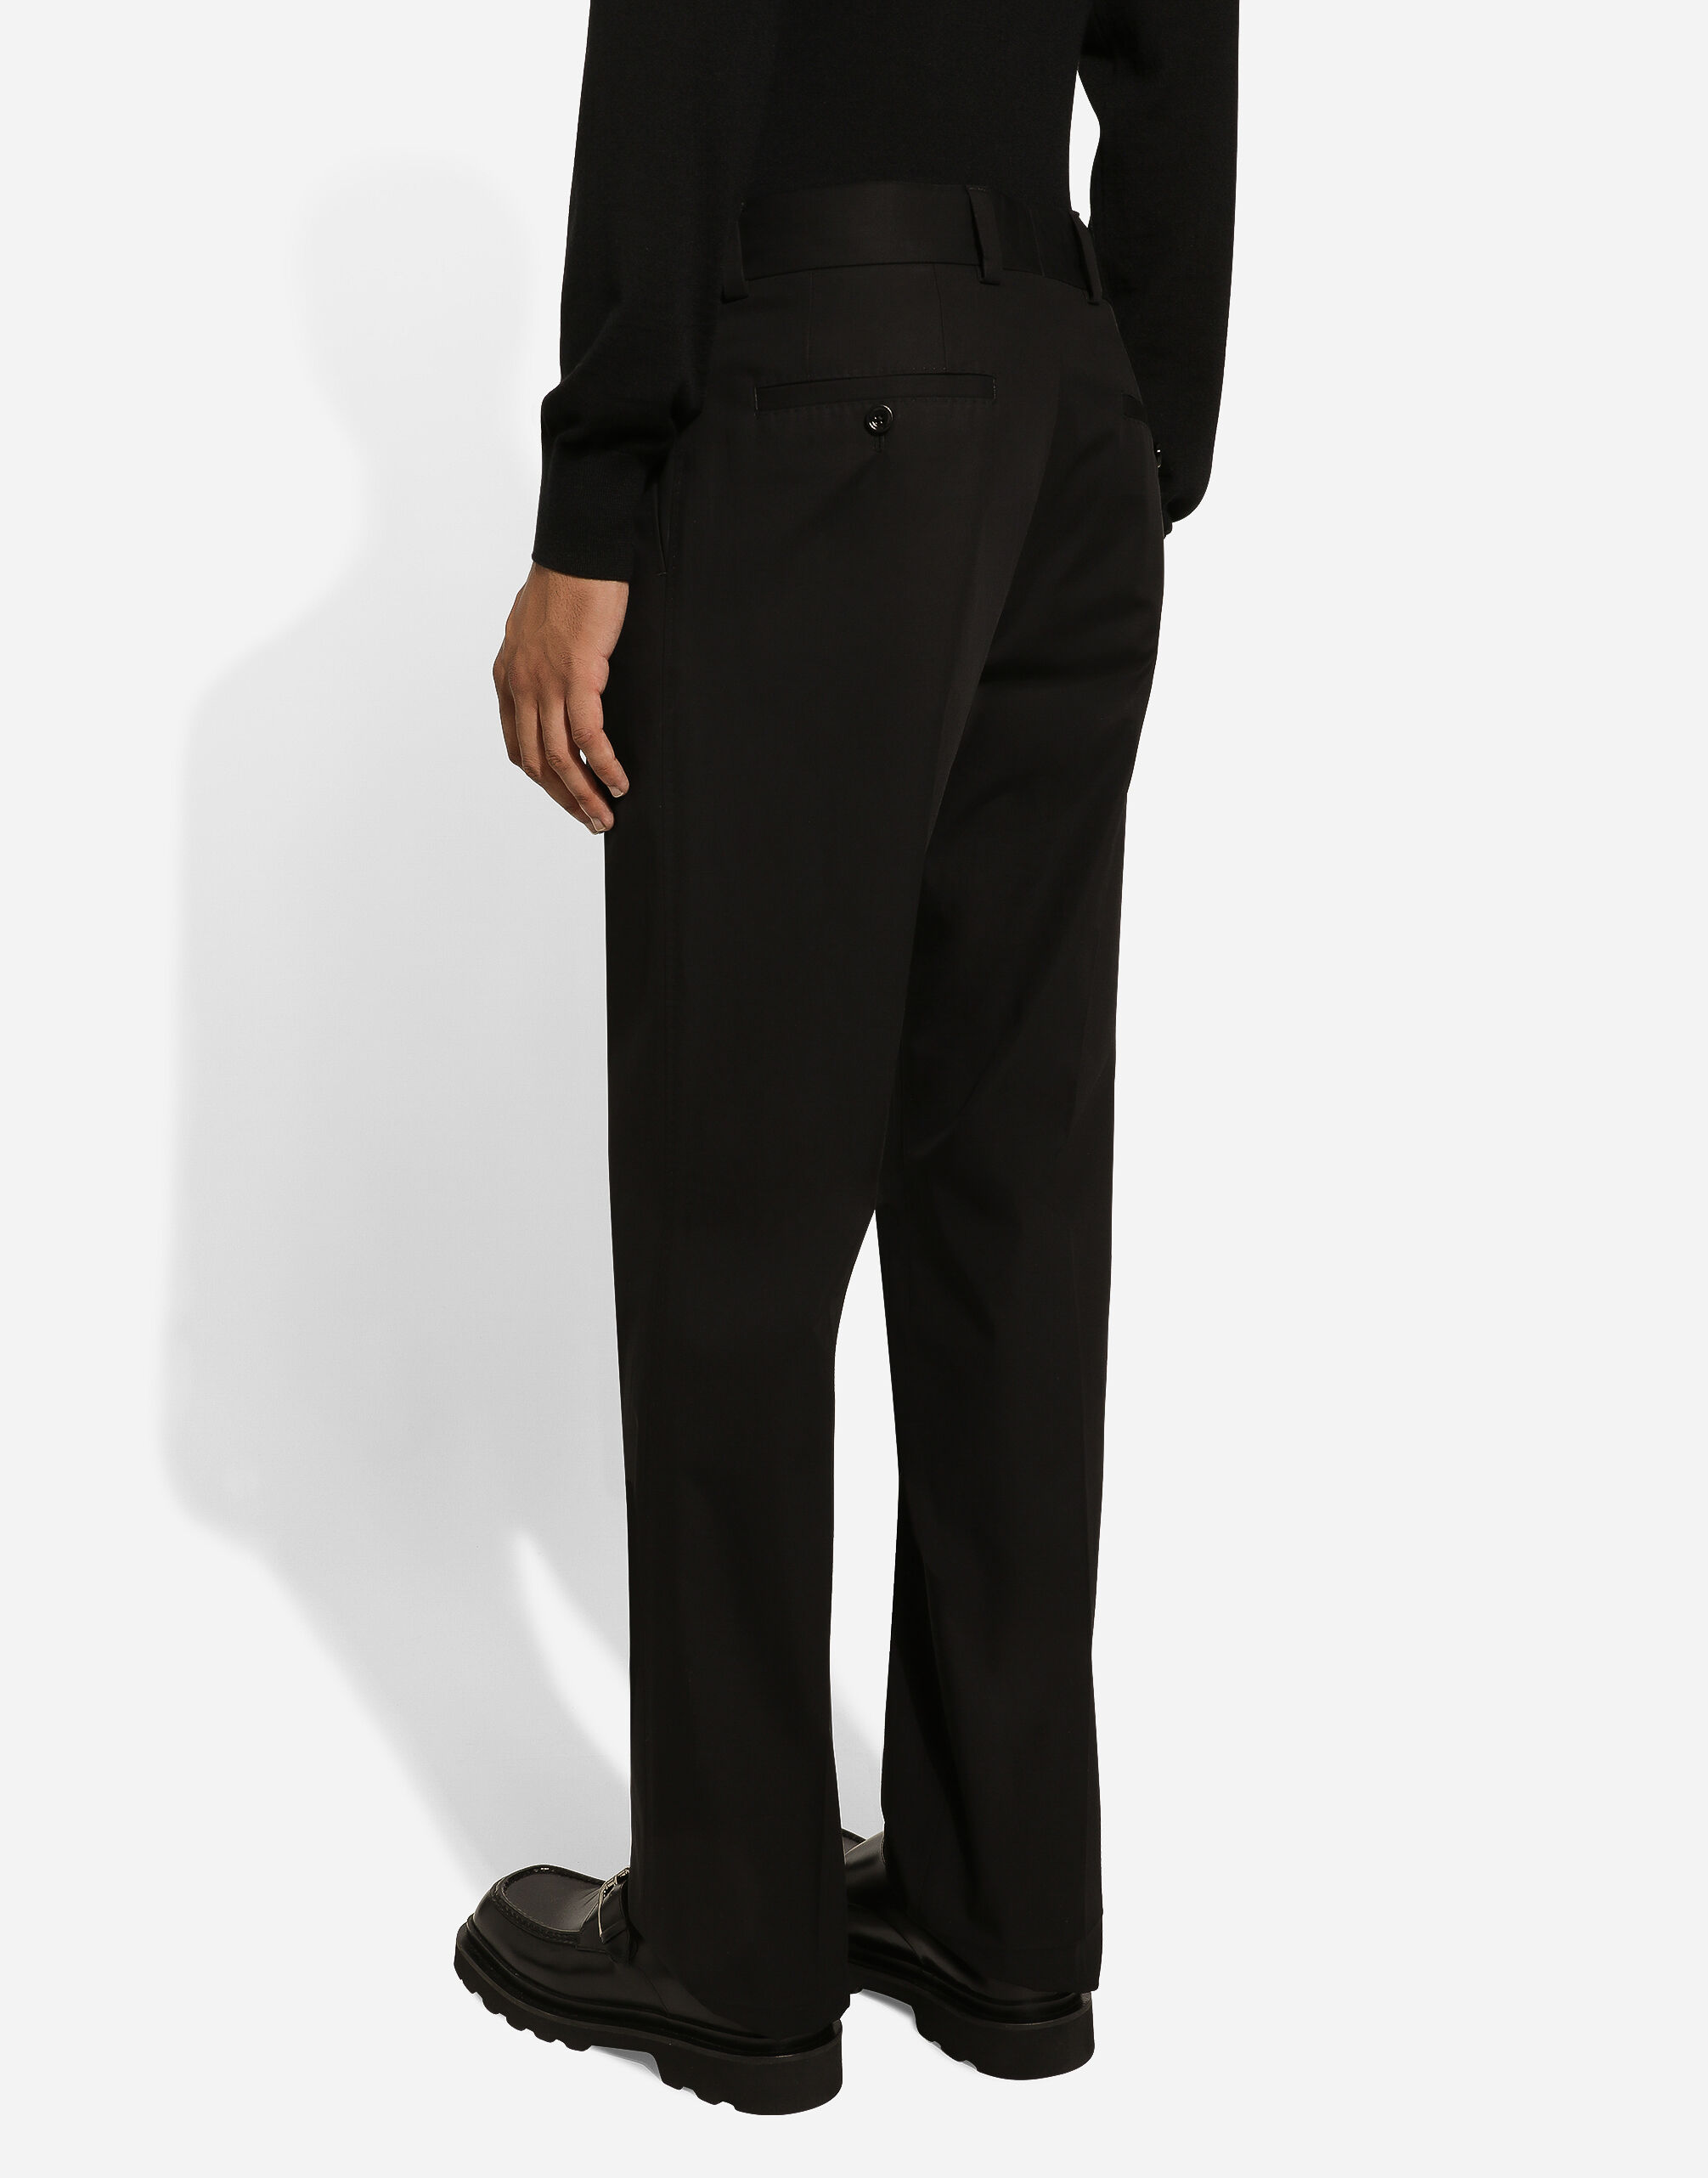 Cotton pants with darts in Black for | Dolce&Gabbana® US